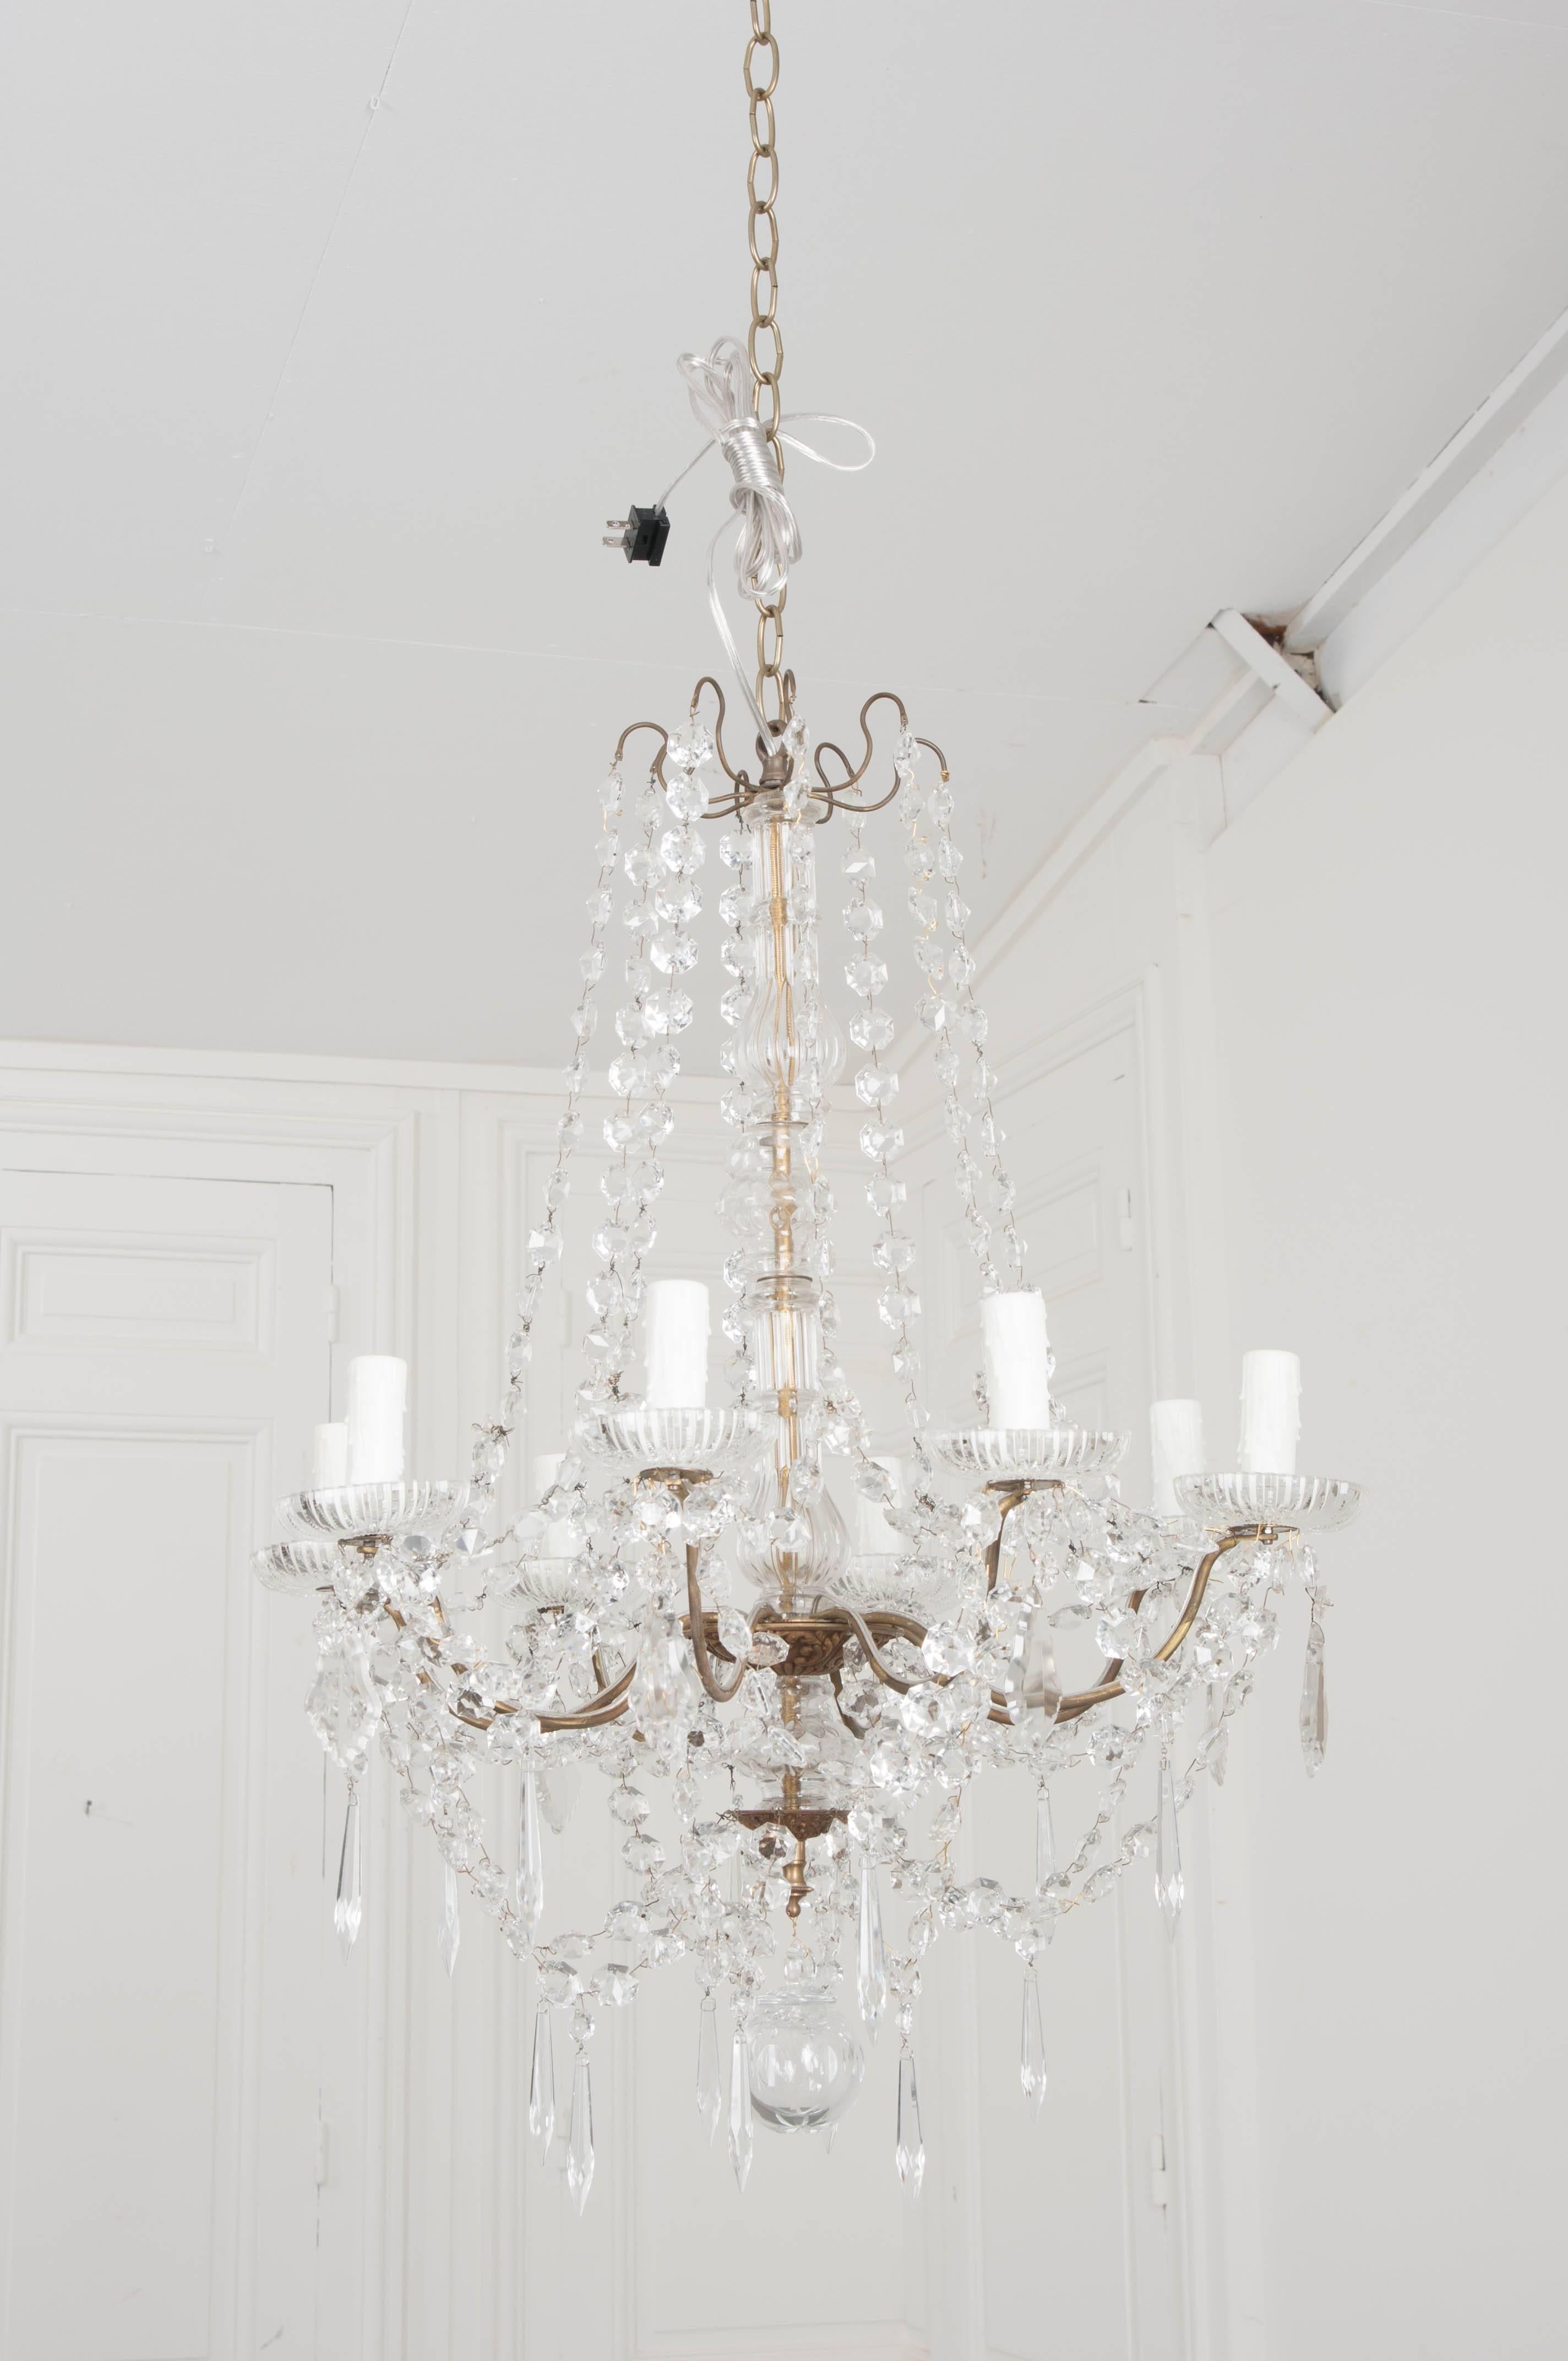 An exceptional late 19th century French eight-light crystal and brass chandelier. The light has a slender brass frame, from which crystal garlands and chains hang, supporting and beautifying the antique. The central column is encased in blown glass